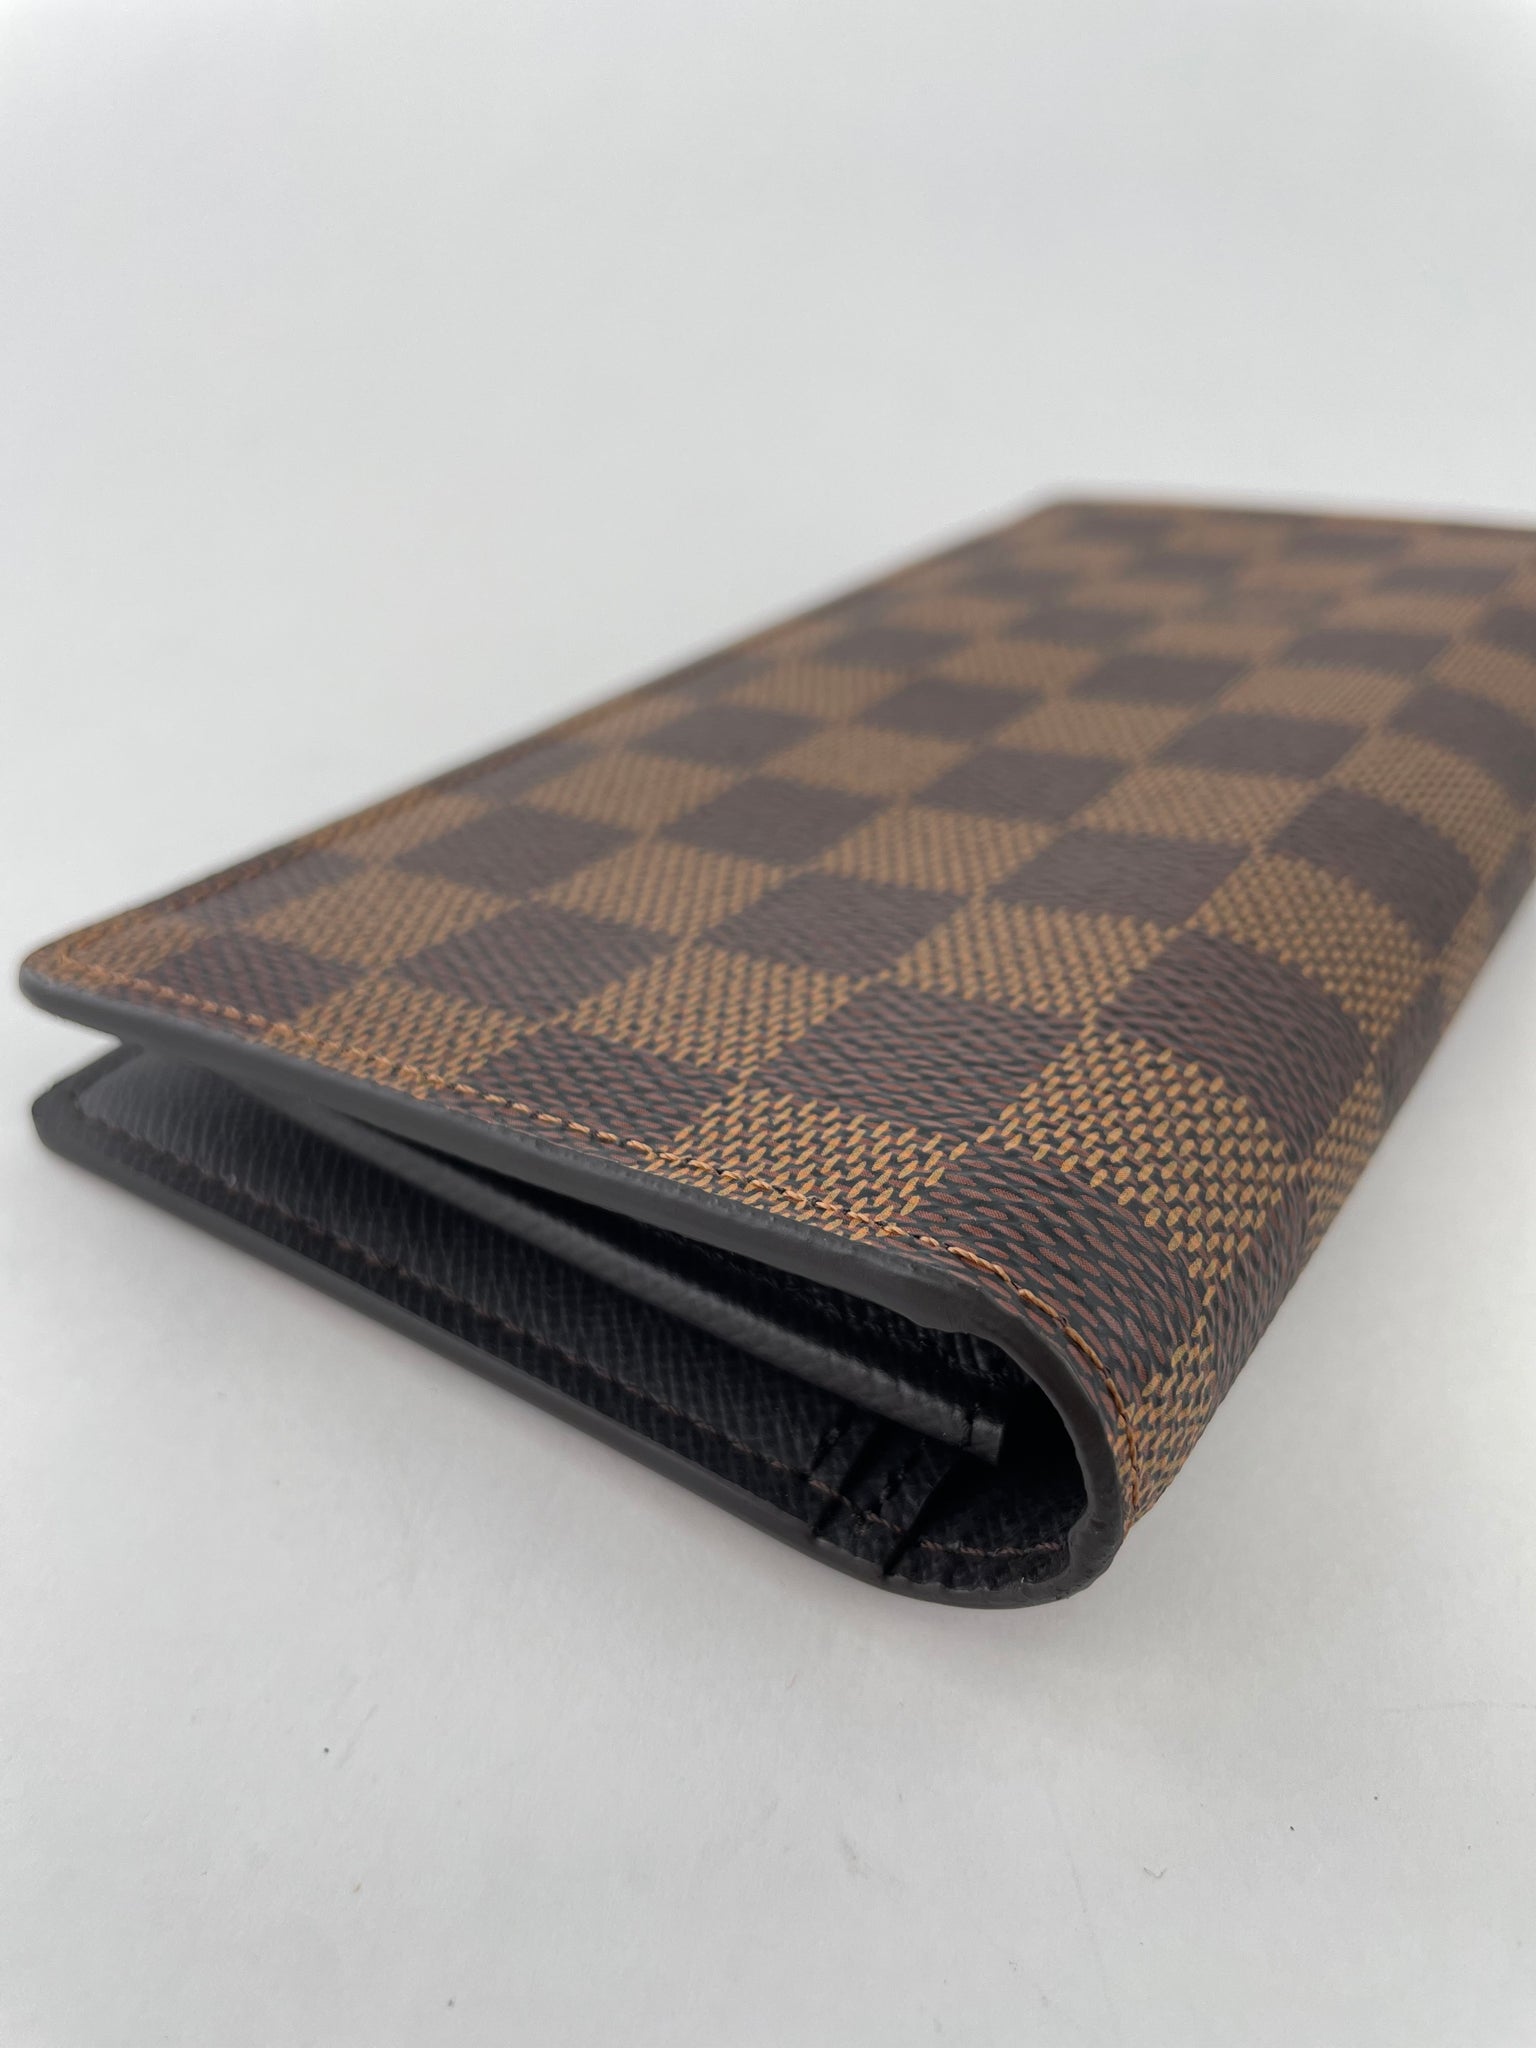 Brandname New/Used Authentic💯 on Instagram: Louis vuitton hinge brazza  wallet Limited Virgil collab(Director : off white) รีเซล 30,000 ++ Price :  19,900 Size - Condition Used 90 % (หัก 10% จา